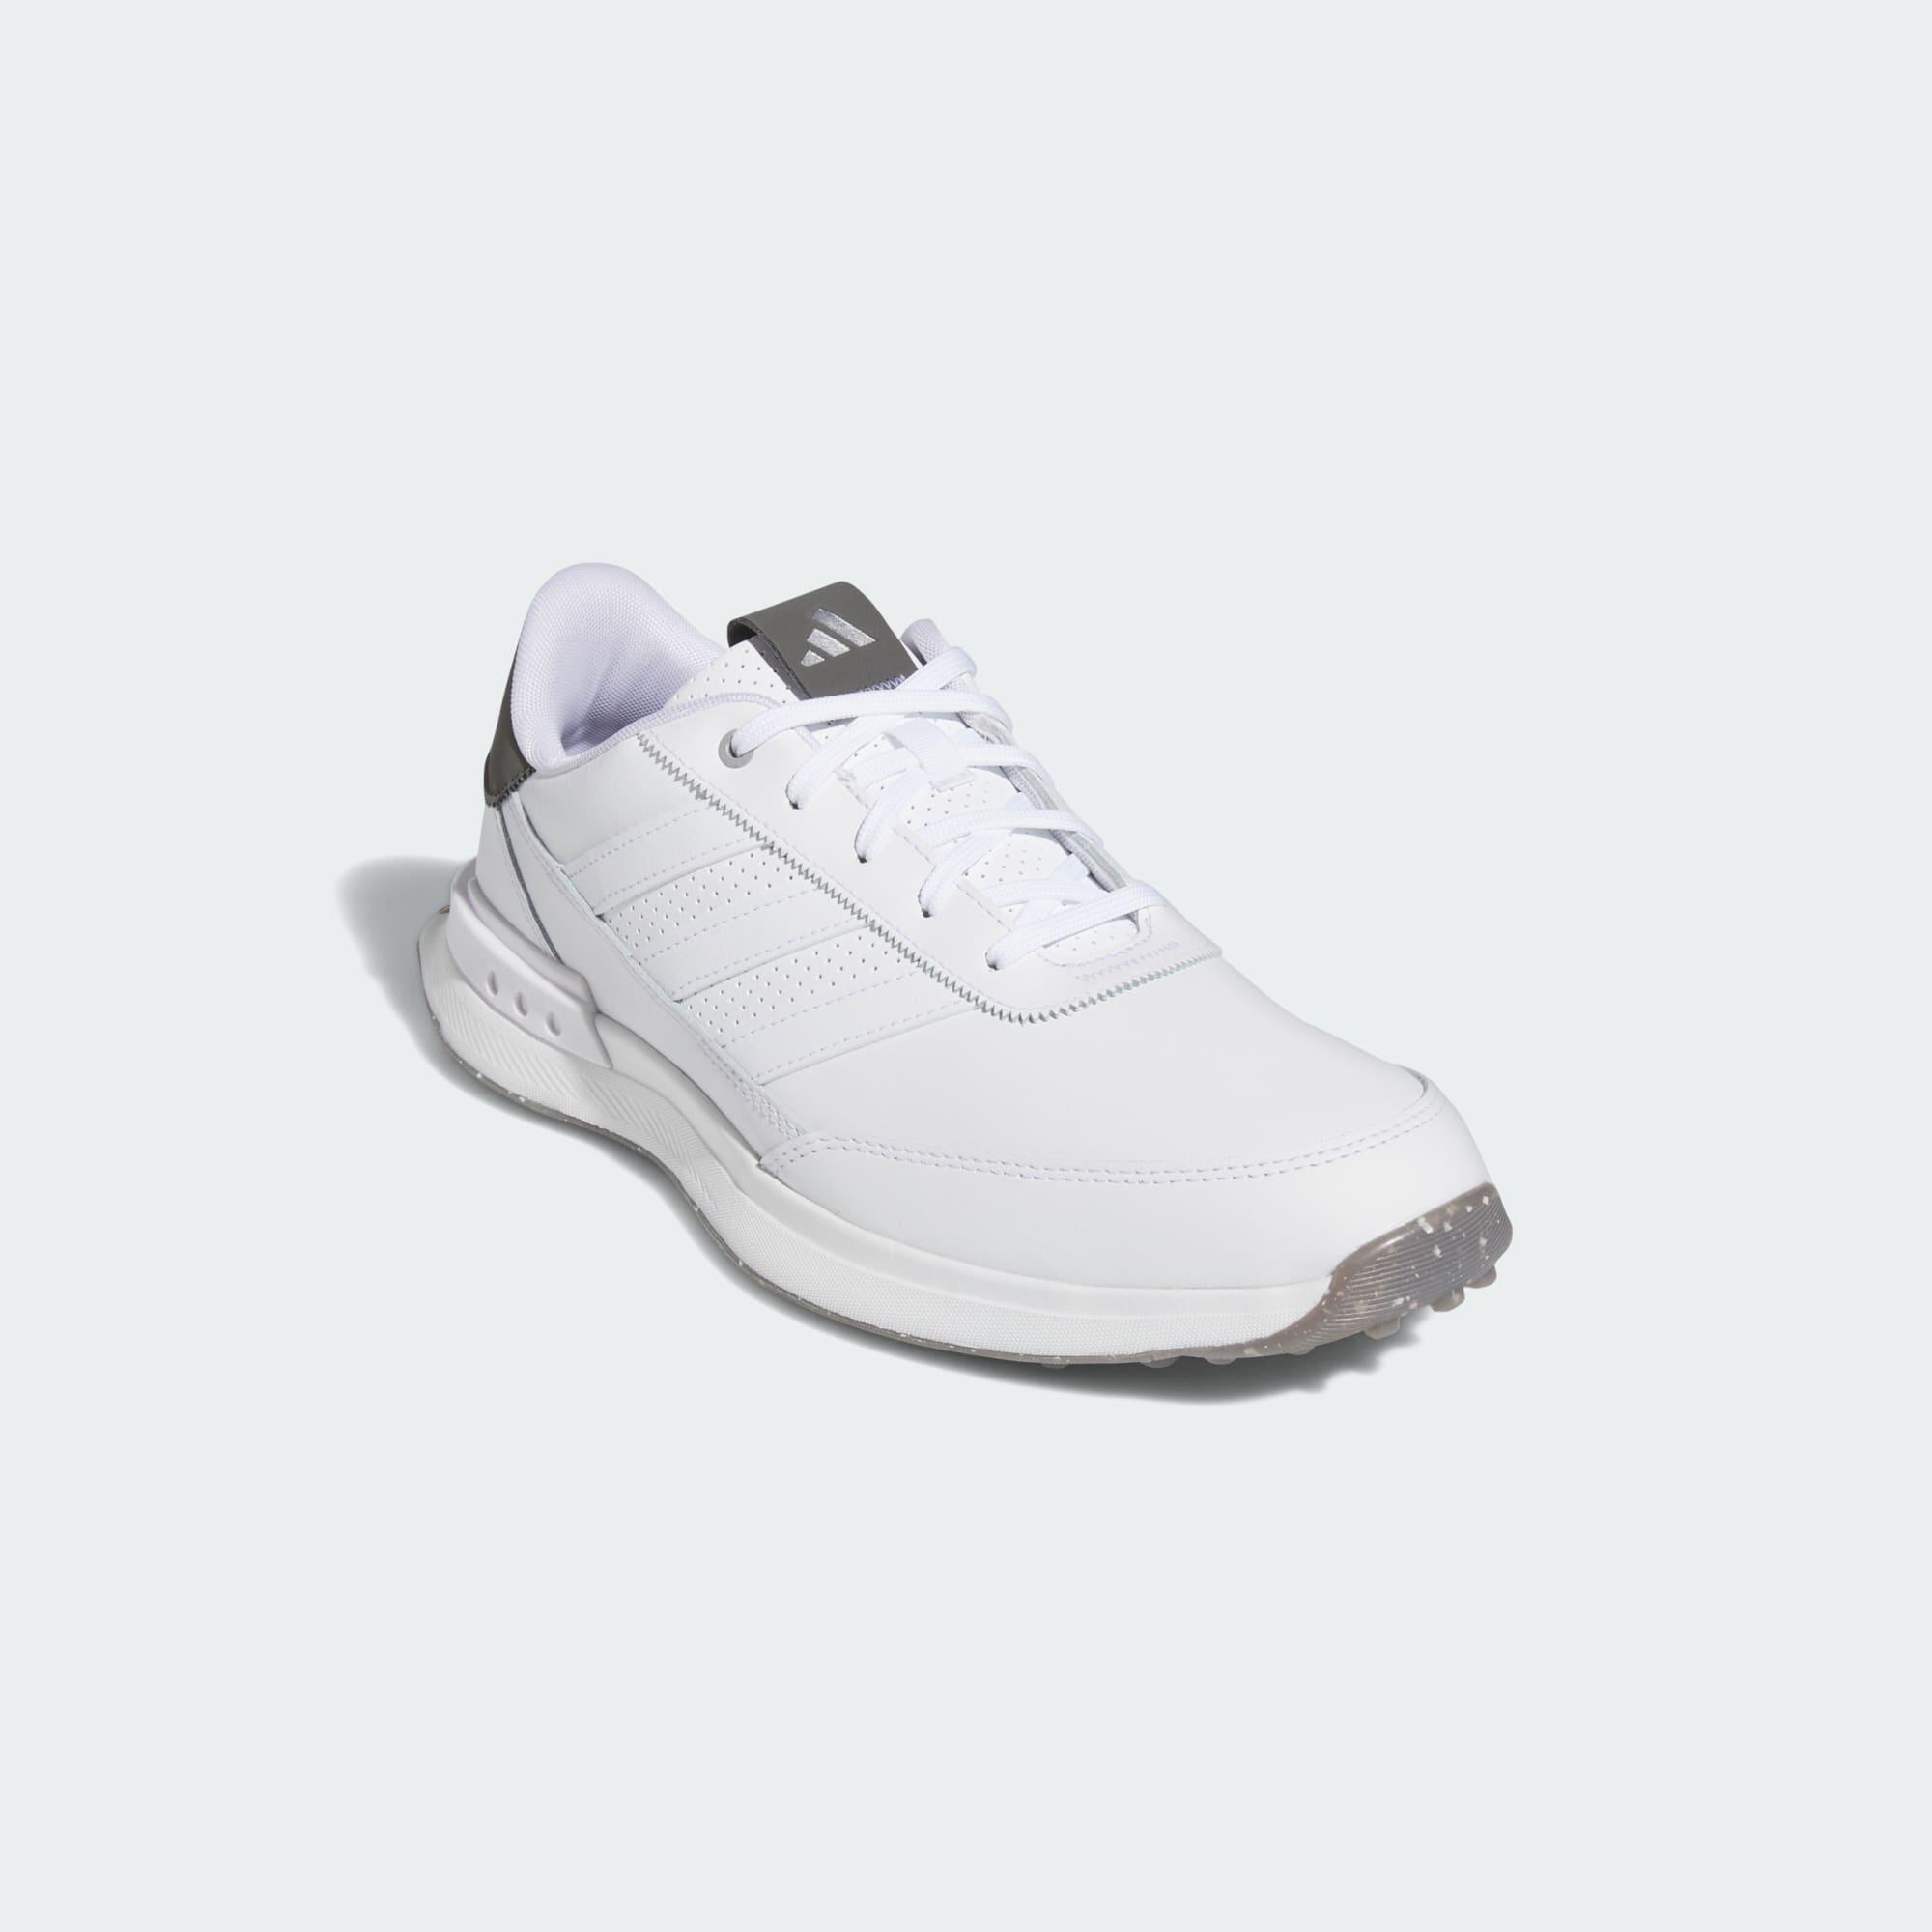 S2G Spikeless Leather 24 Golf Shoes 5/7